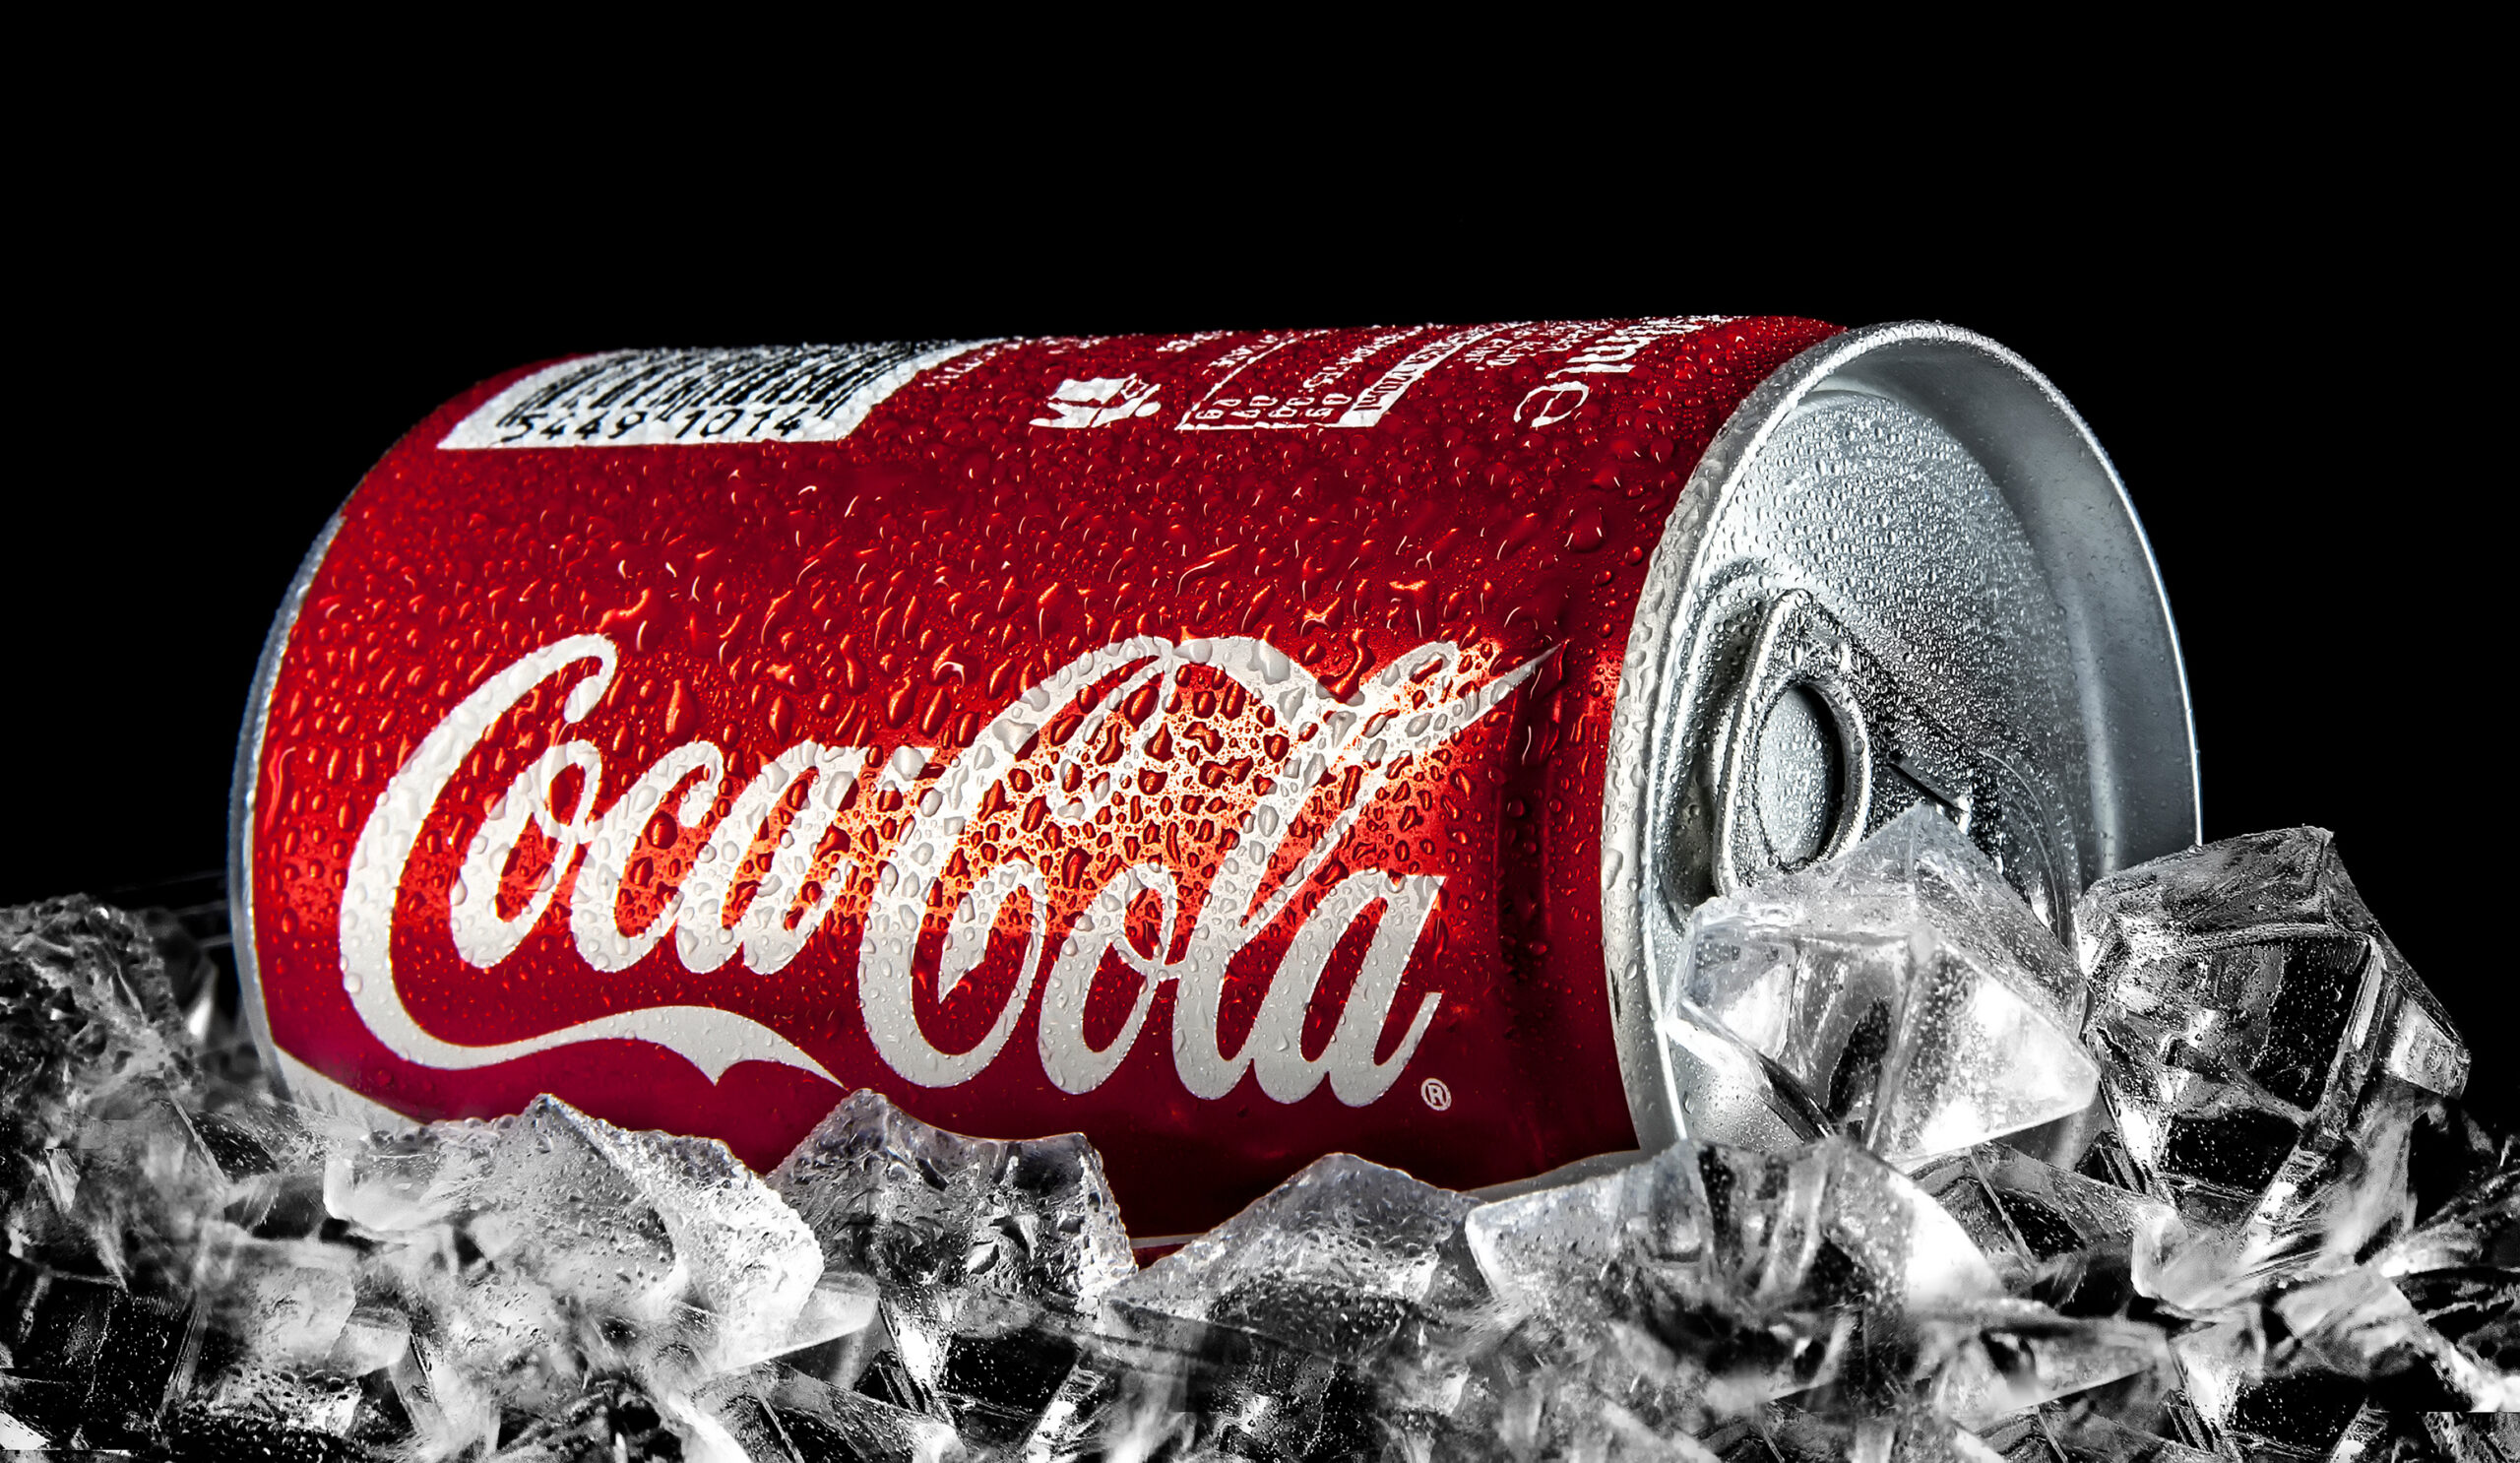 SWINDON, UK - FEBRUARY 2, 2014: Can of Coca-Cola on a bed of ice over a black background